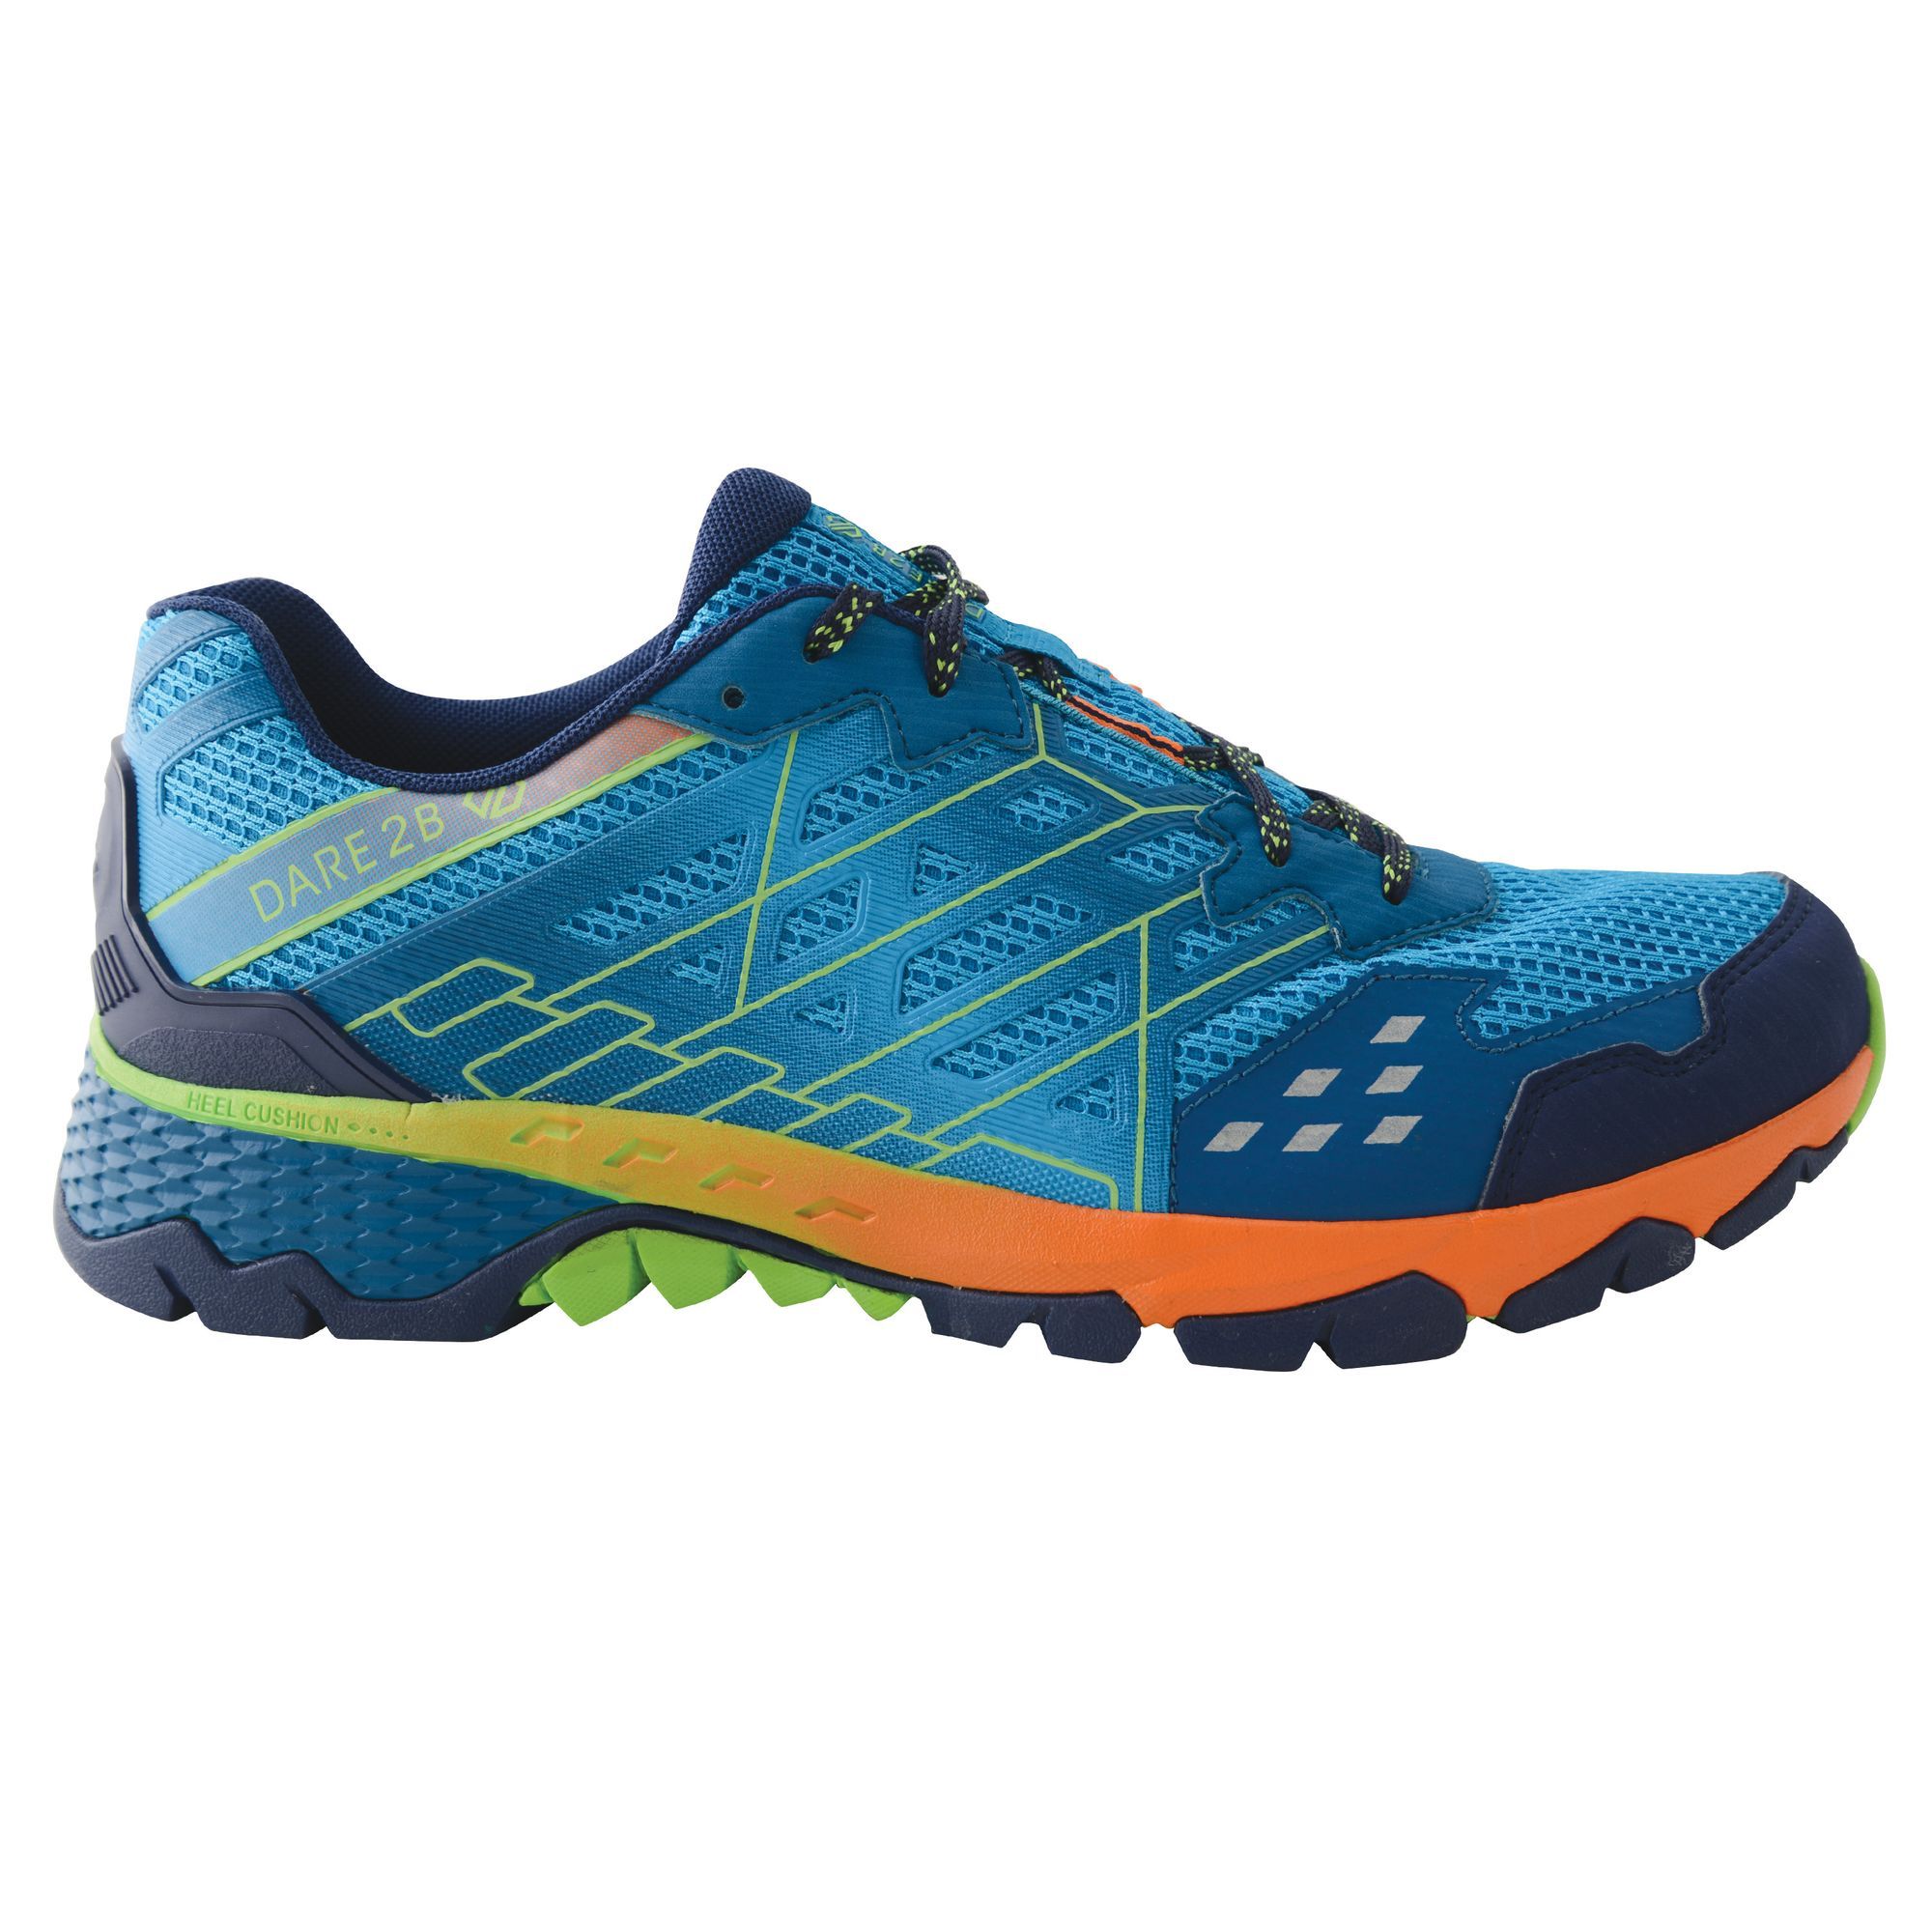 Material: 50% thermo plastic polyurethane/25% polyester/15% polyurethane/10% rubber. Lightweight and versatile trail shoe. Made for stability and grip. Breathable mesh upper construction with supportive PU overlays. Free foot lacing system minimises pressure on the top of the foot allowing blood to flow freely. TPR heel mould protects and stabilises the ankle. Shock absorbing EVA midsole cushion feet from impact. Multi-directional lugs give exceptional traction and braking power at the heel. Double eyelet for secure heel hold.